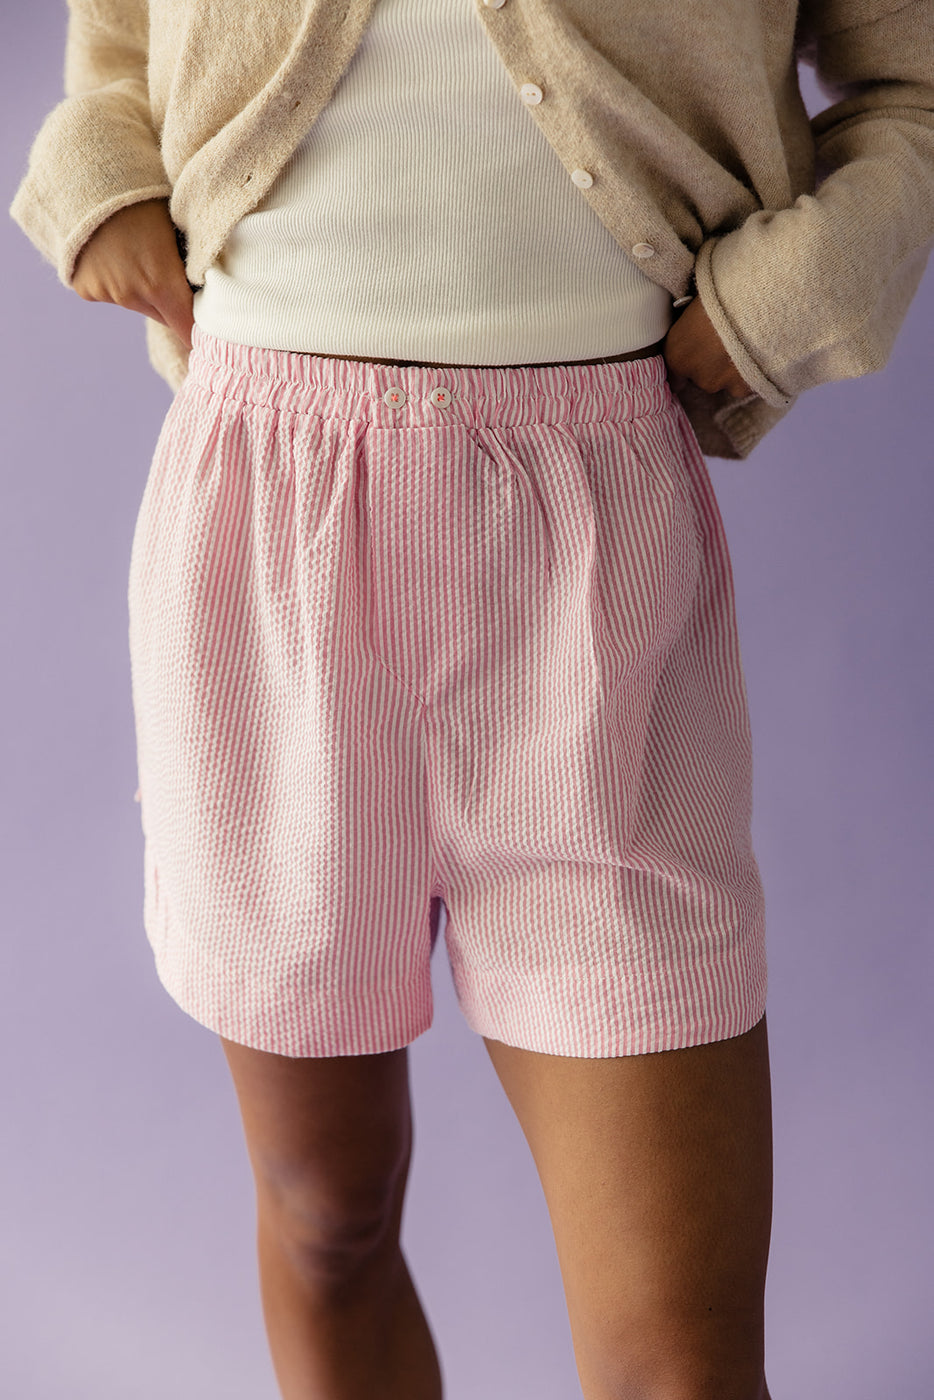 a person wearing a pair of pink and white striped shorts